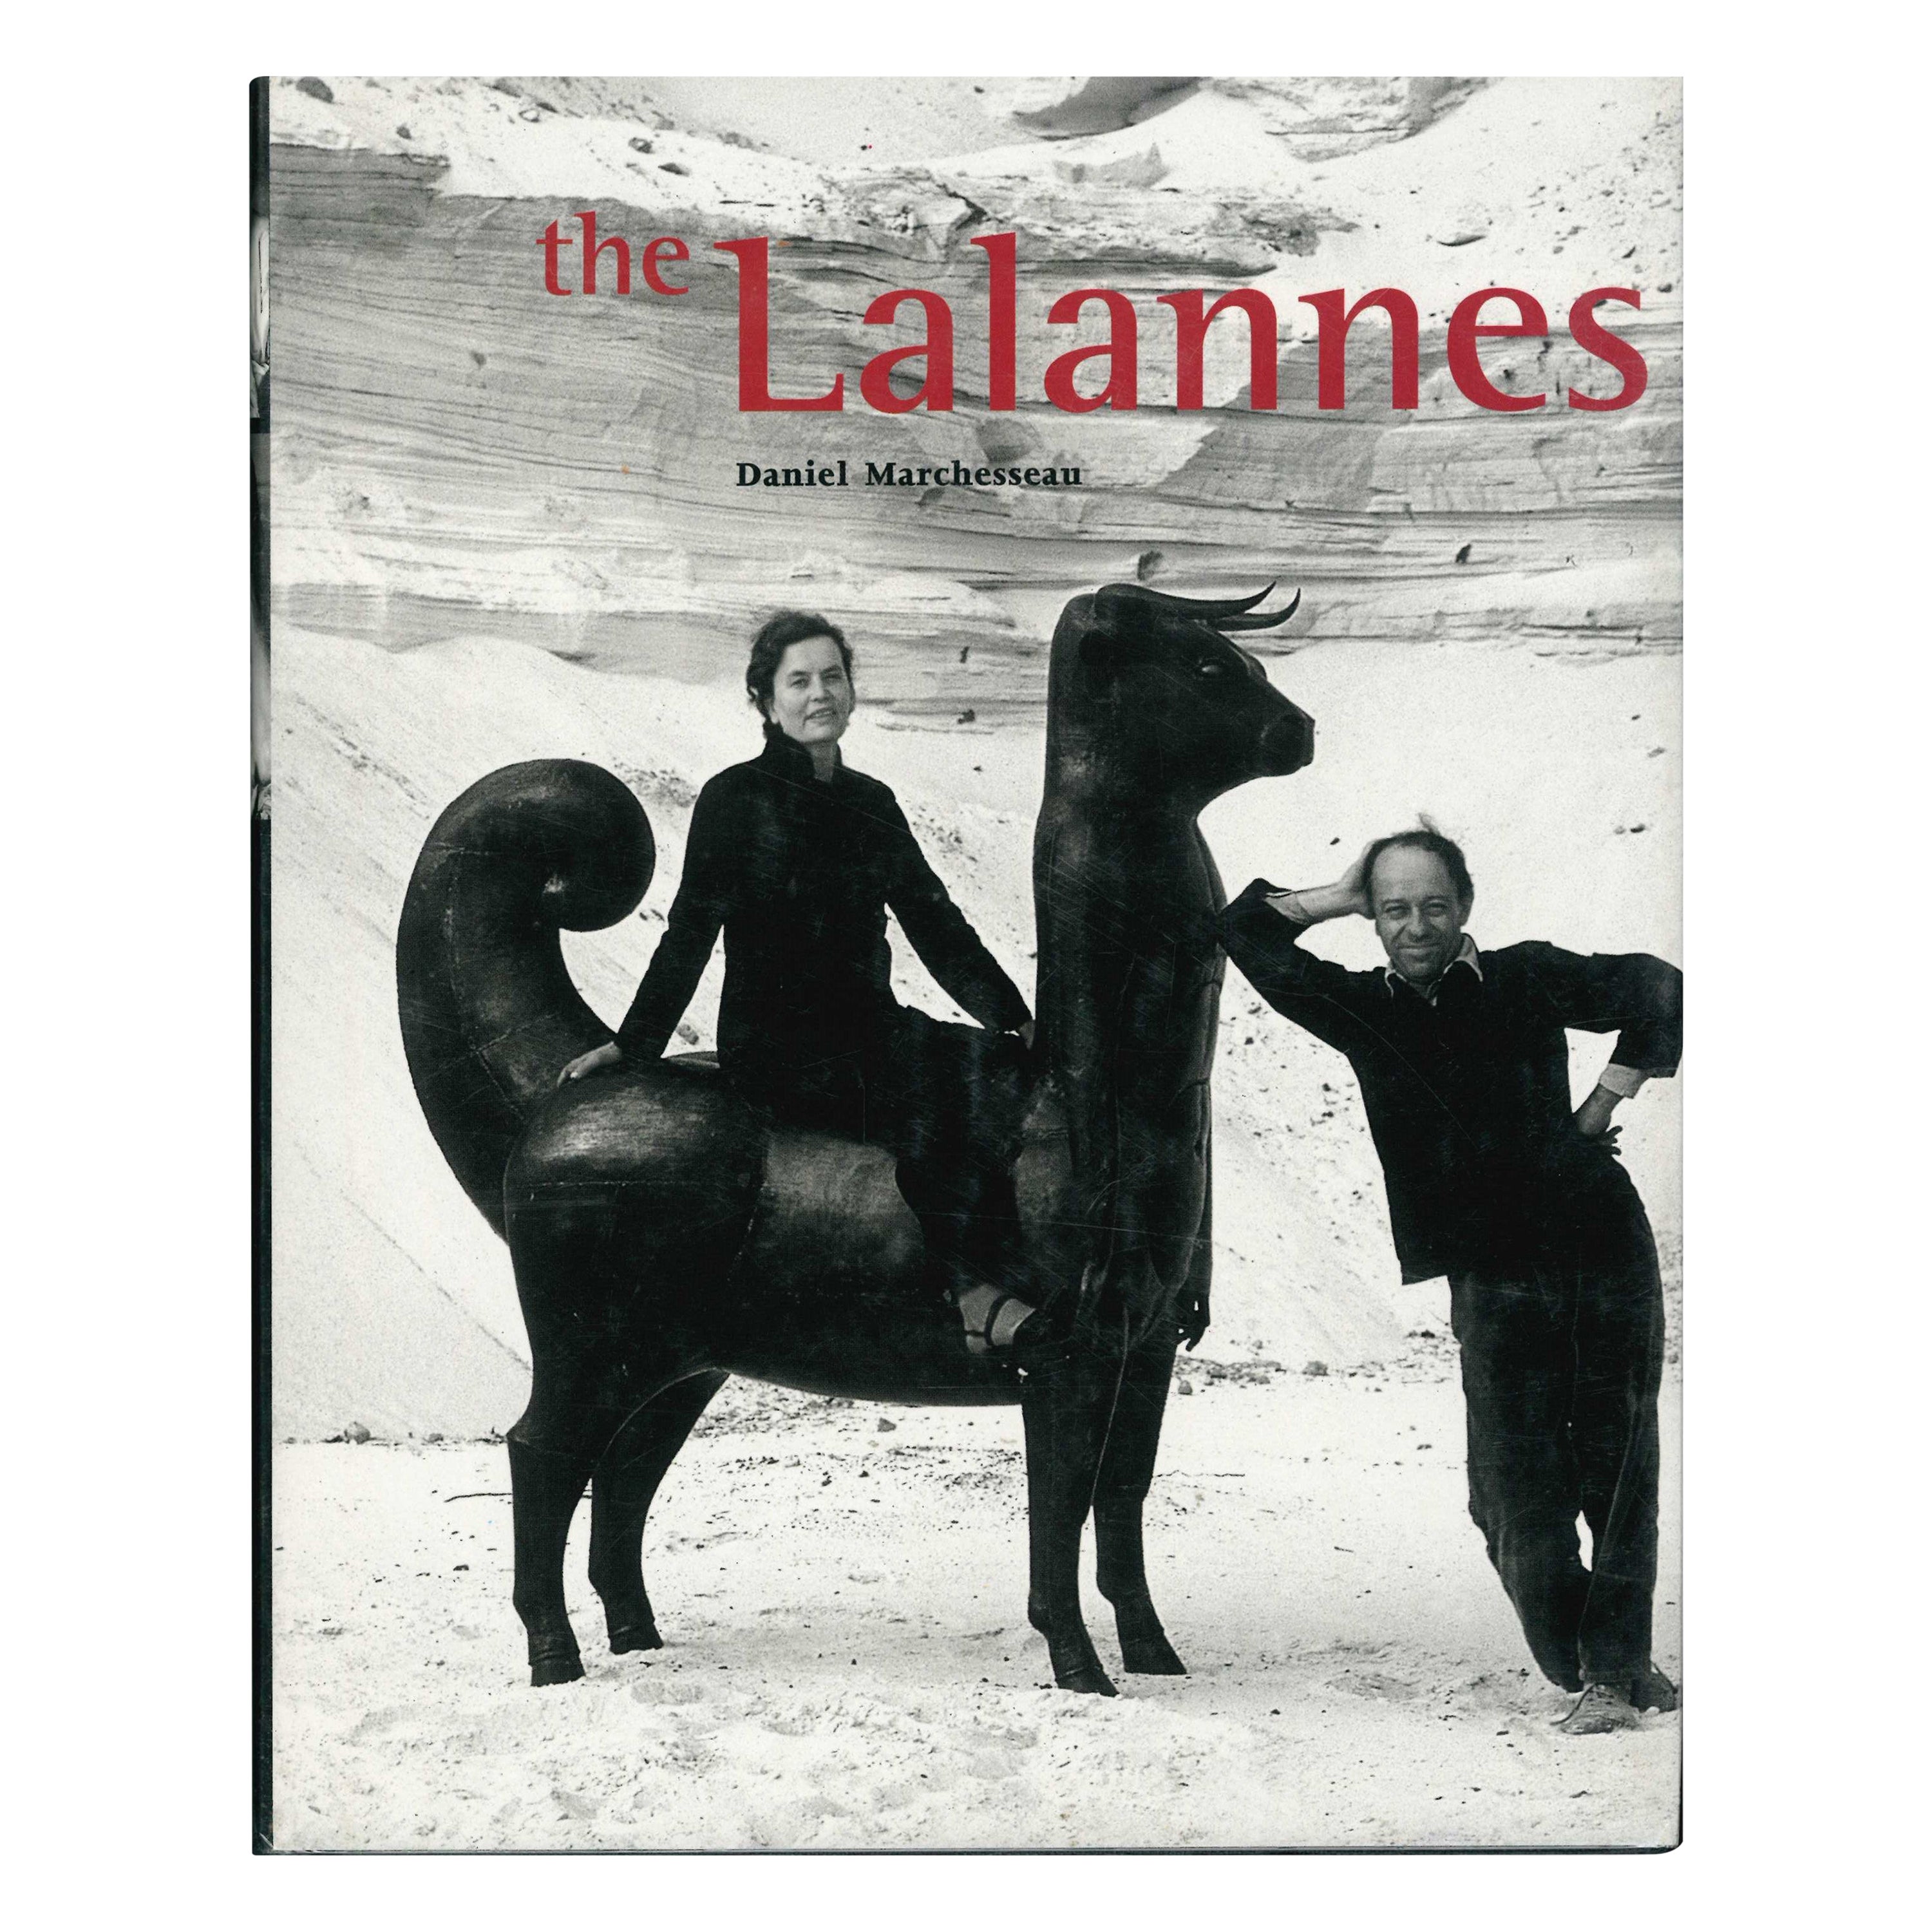 “The Lalannes” Book on the Famous Husband and Wife Sculptors